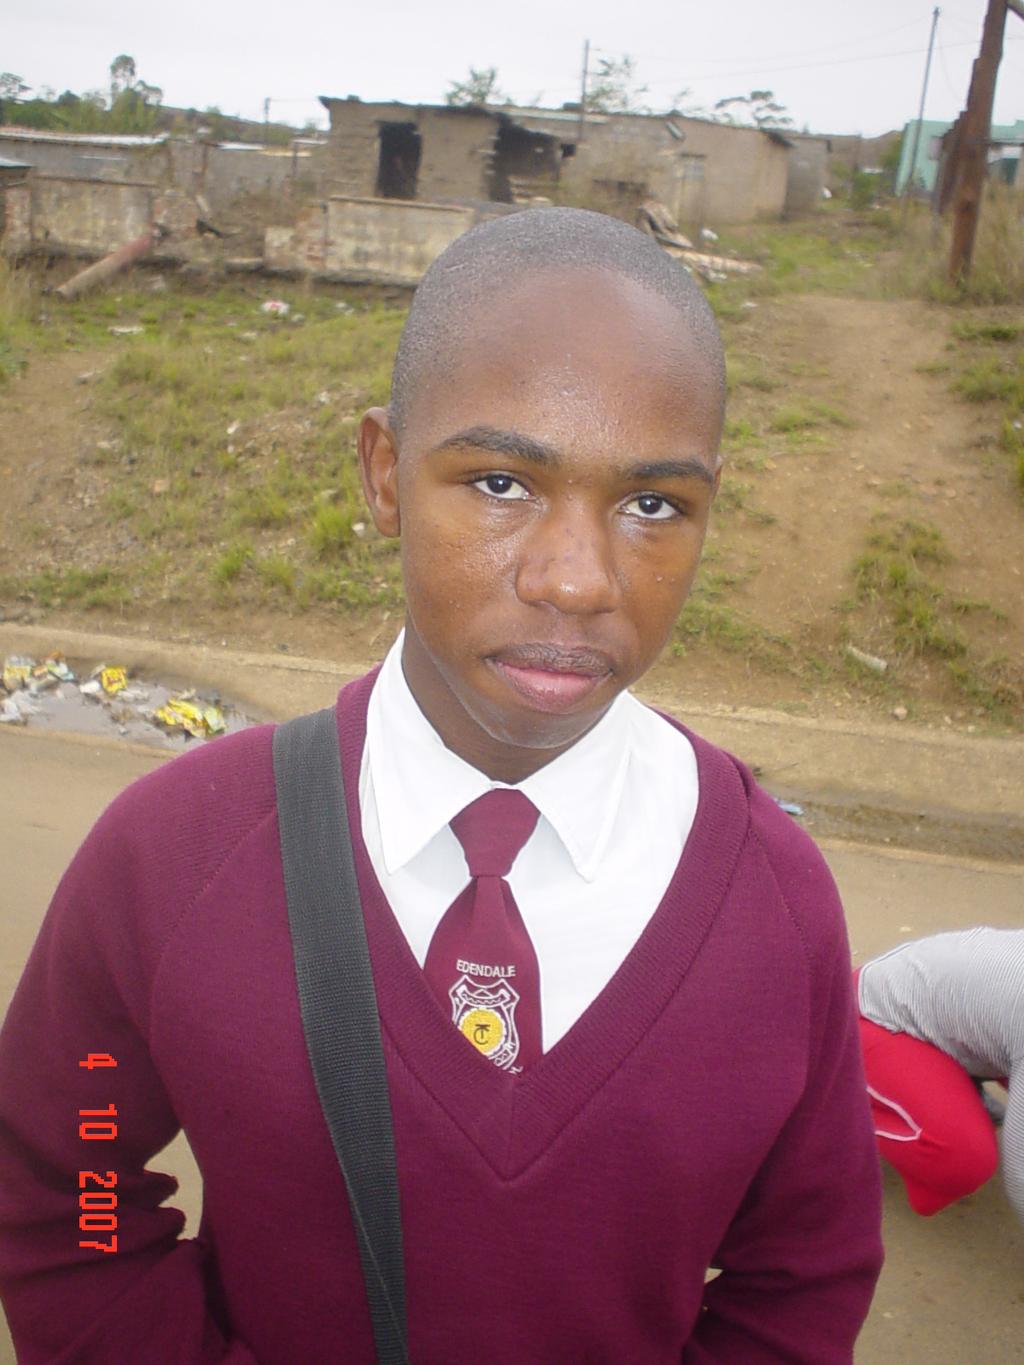 Hi, my name is Ndumiso Ngcobo. (Ndumiso means praising). This is me on the photo below. I am one of the children supported by Sinethemba Trust.